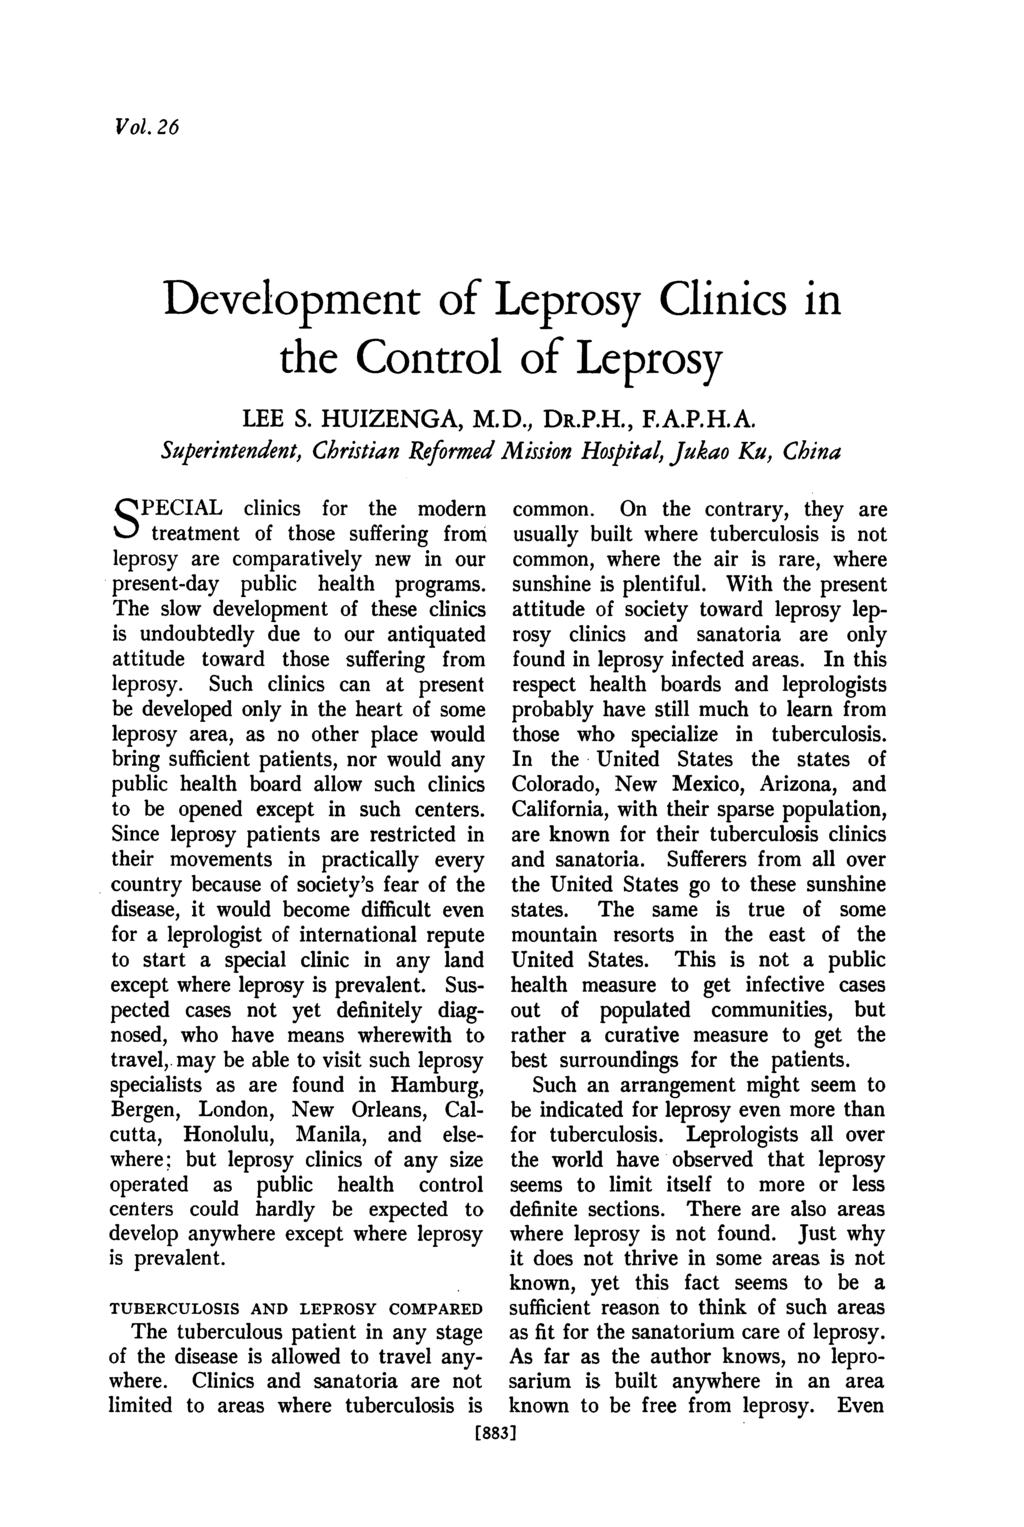 Vol.26 Development of Leprosy Clinics in the Control of Leprosy LEE S. HUIZENGA,